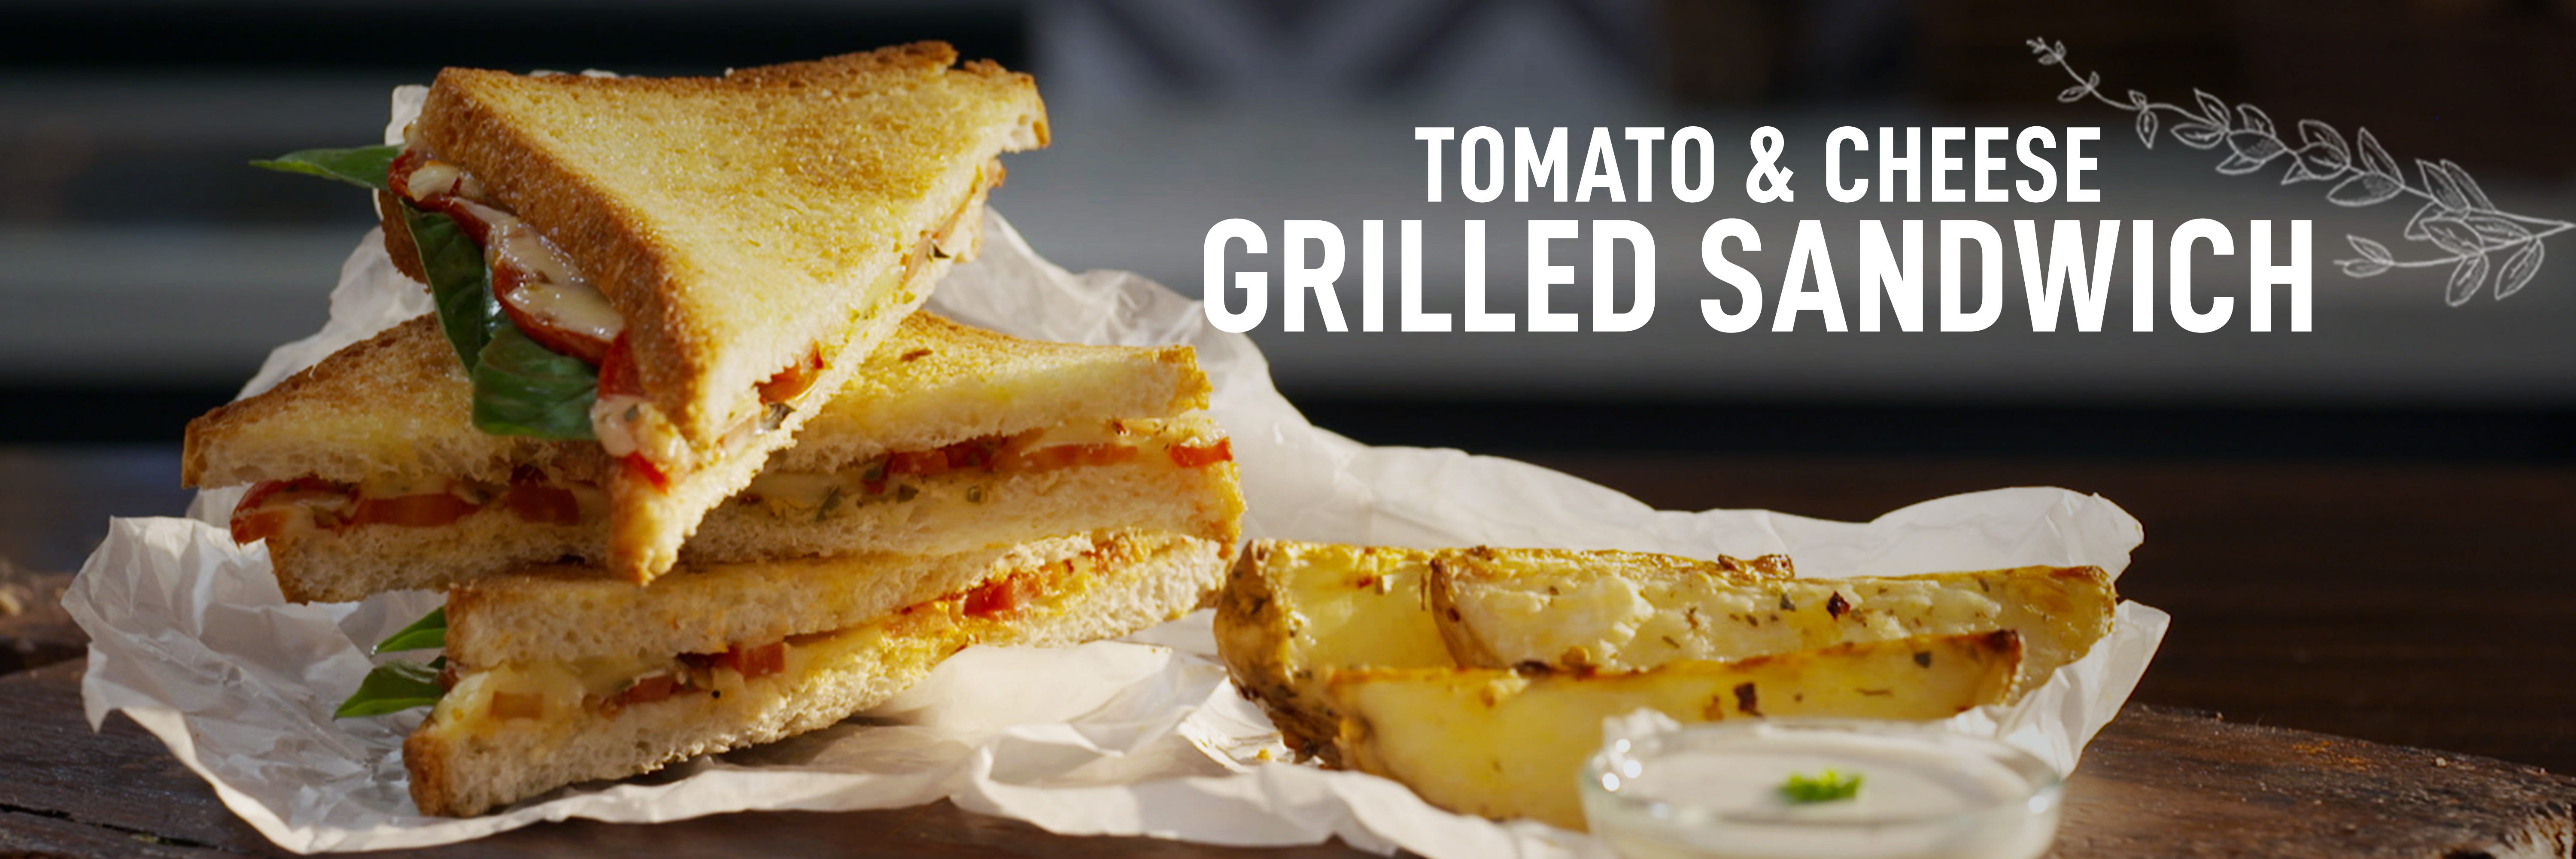 Tomato & Cheese Grilled Sandwich